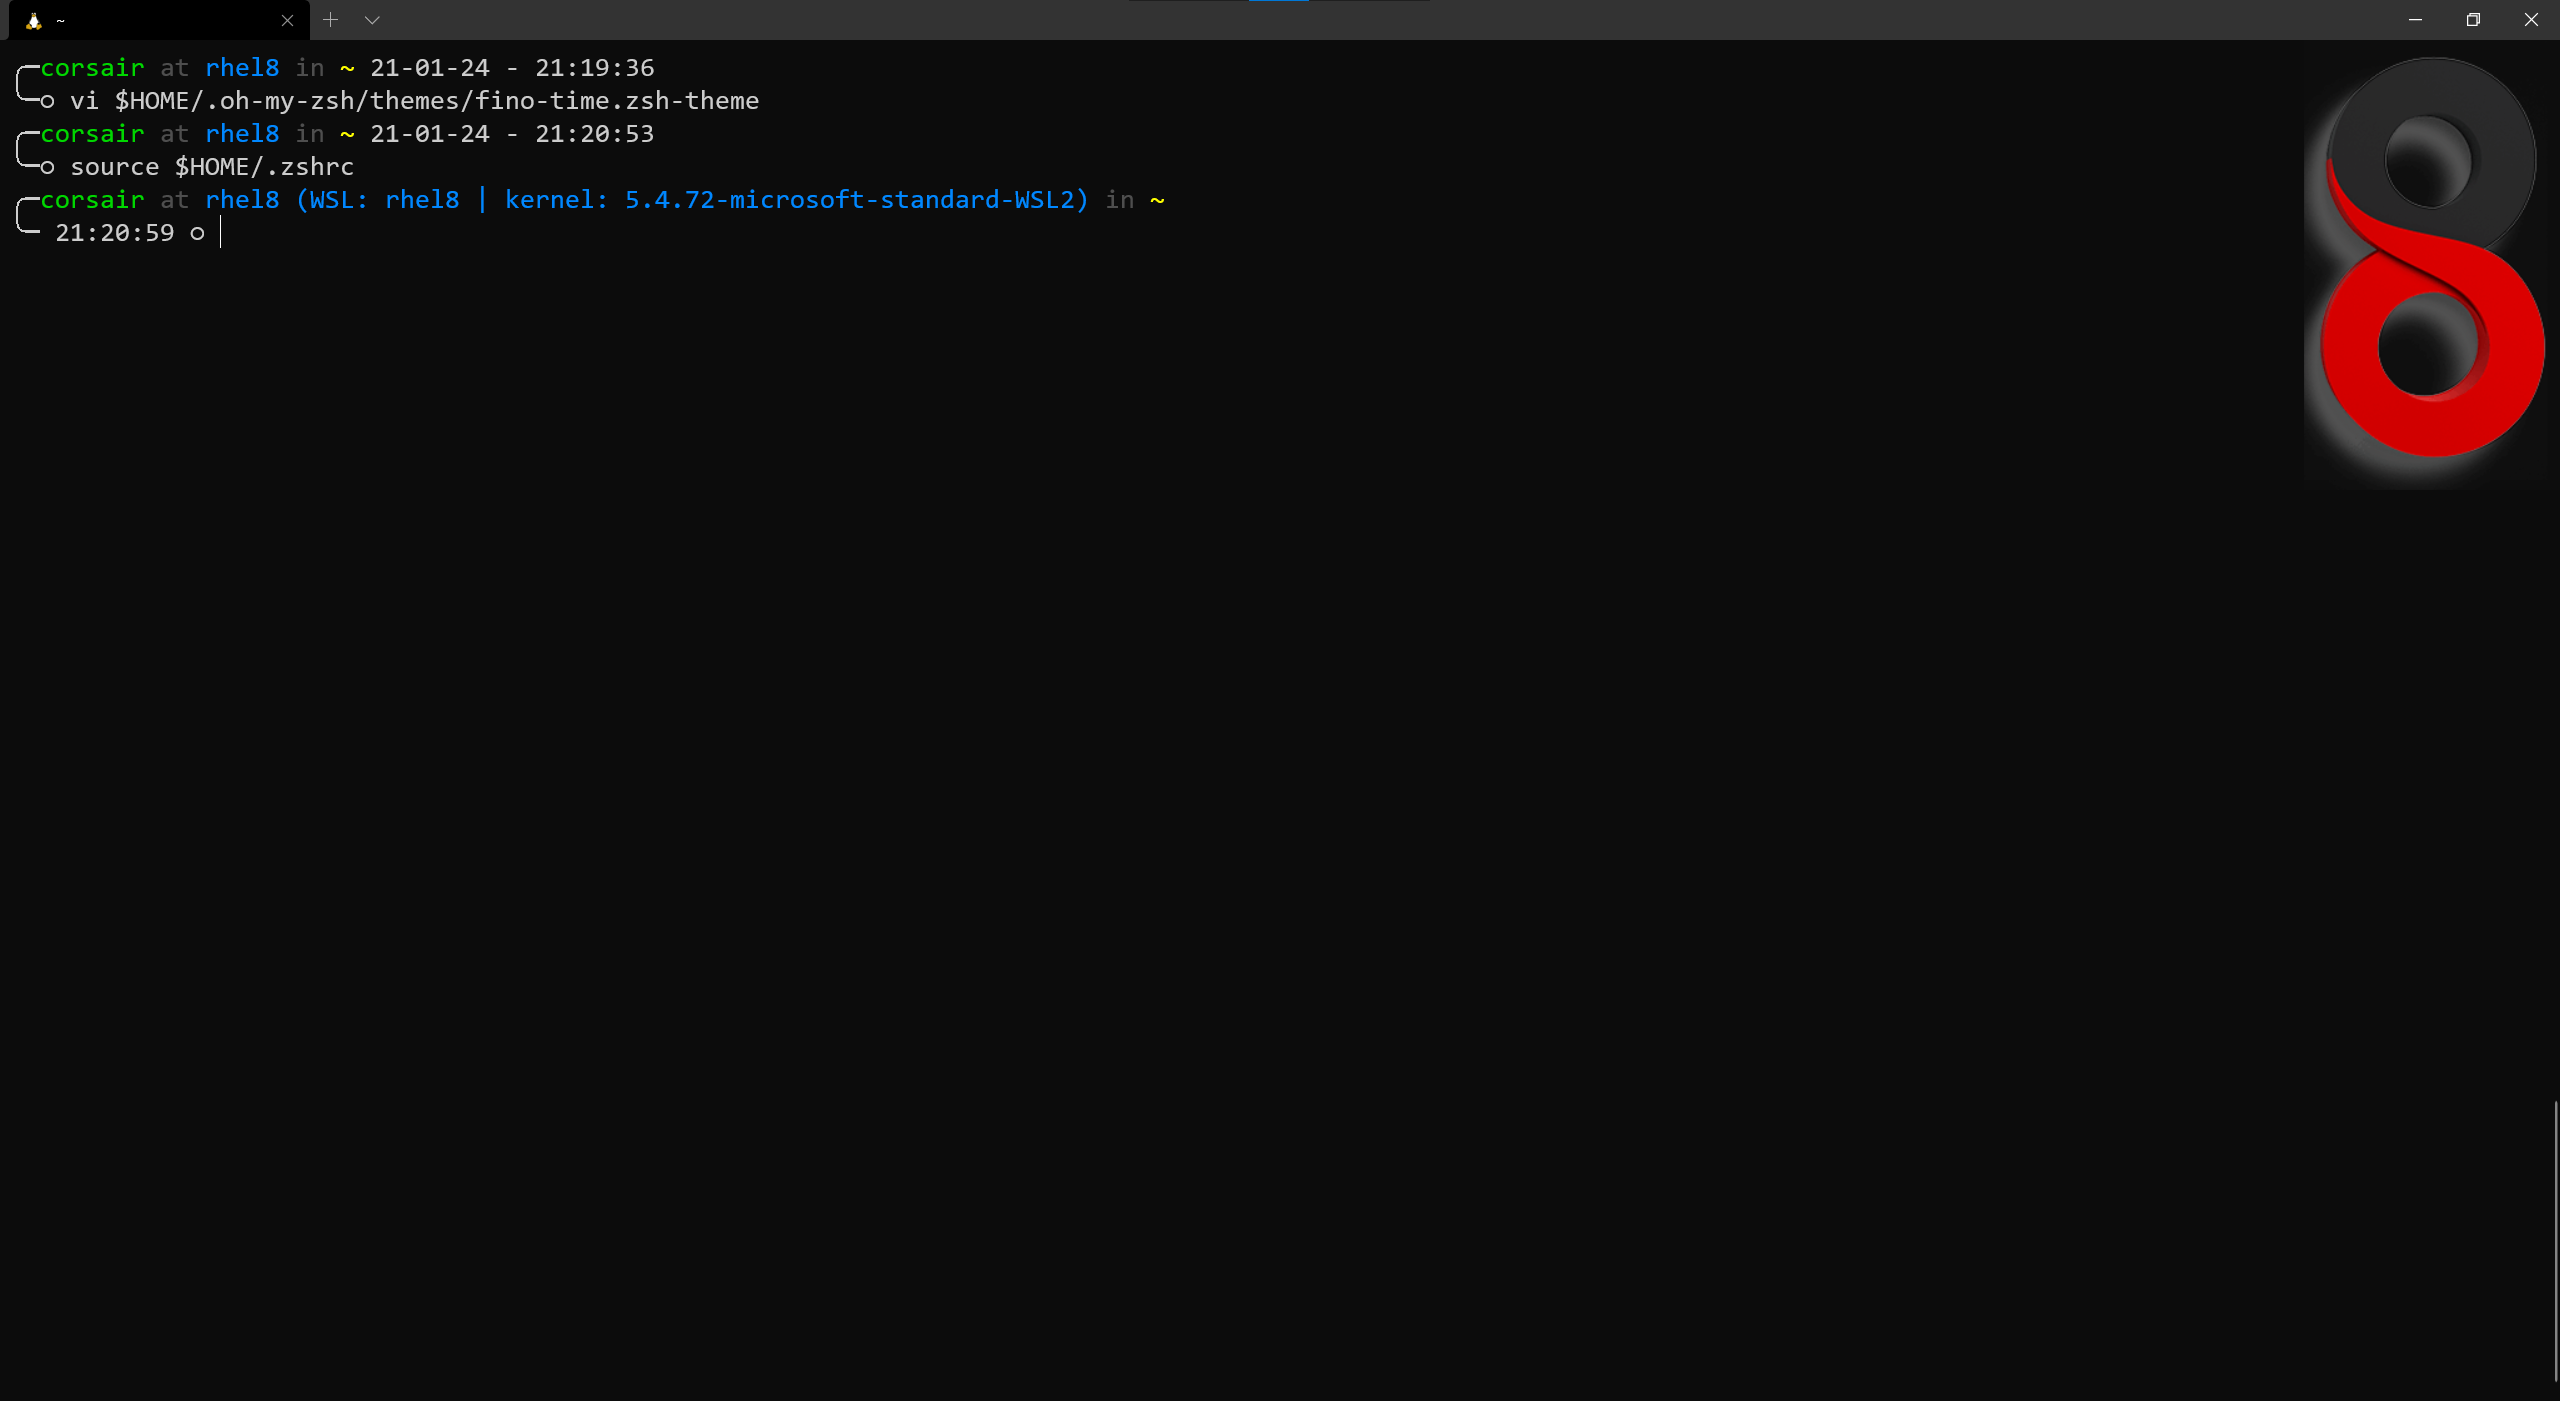 Update the oh my zsh theme